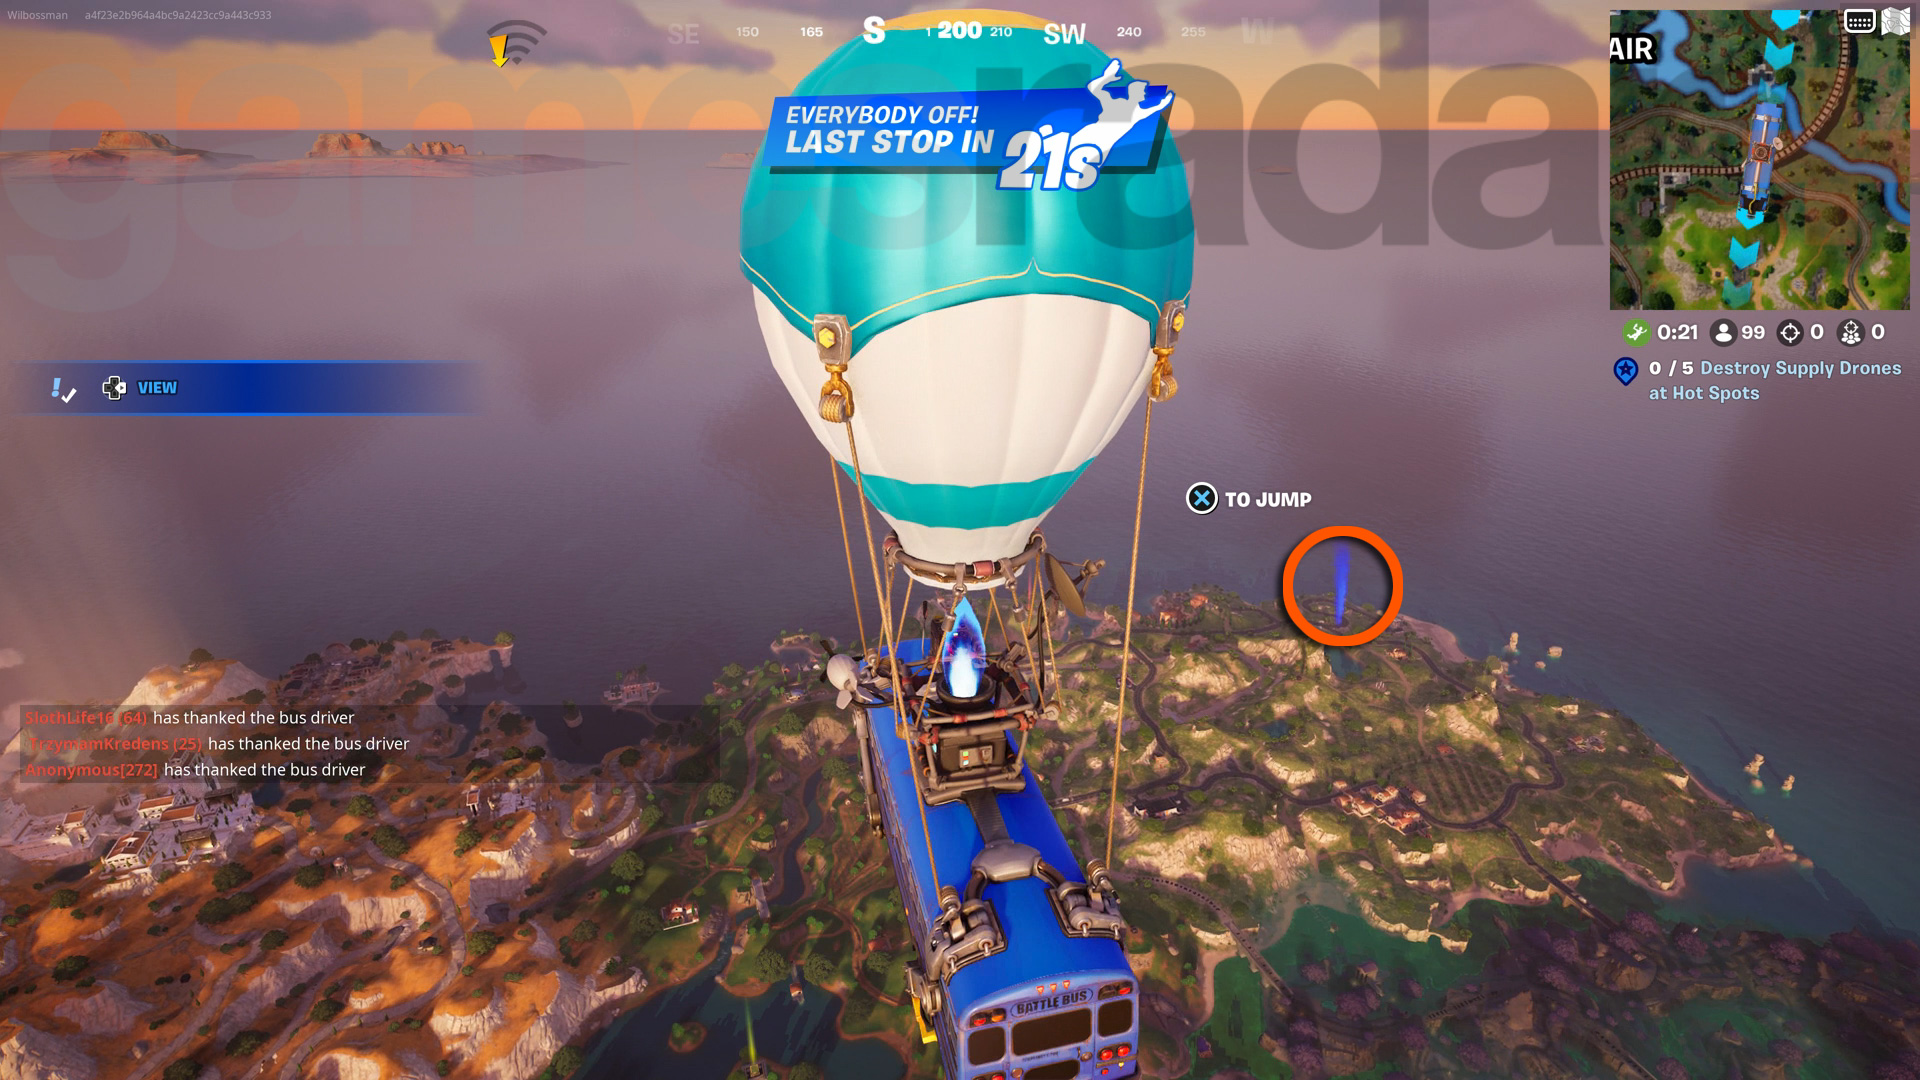 Fortnite Chewbacca location from battle bus